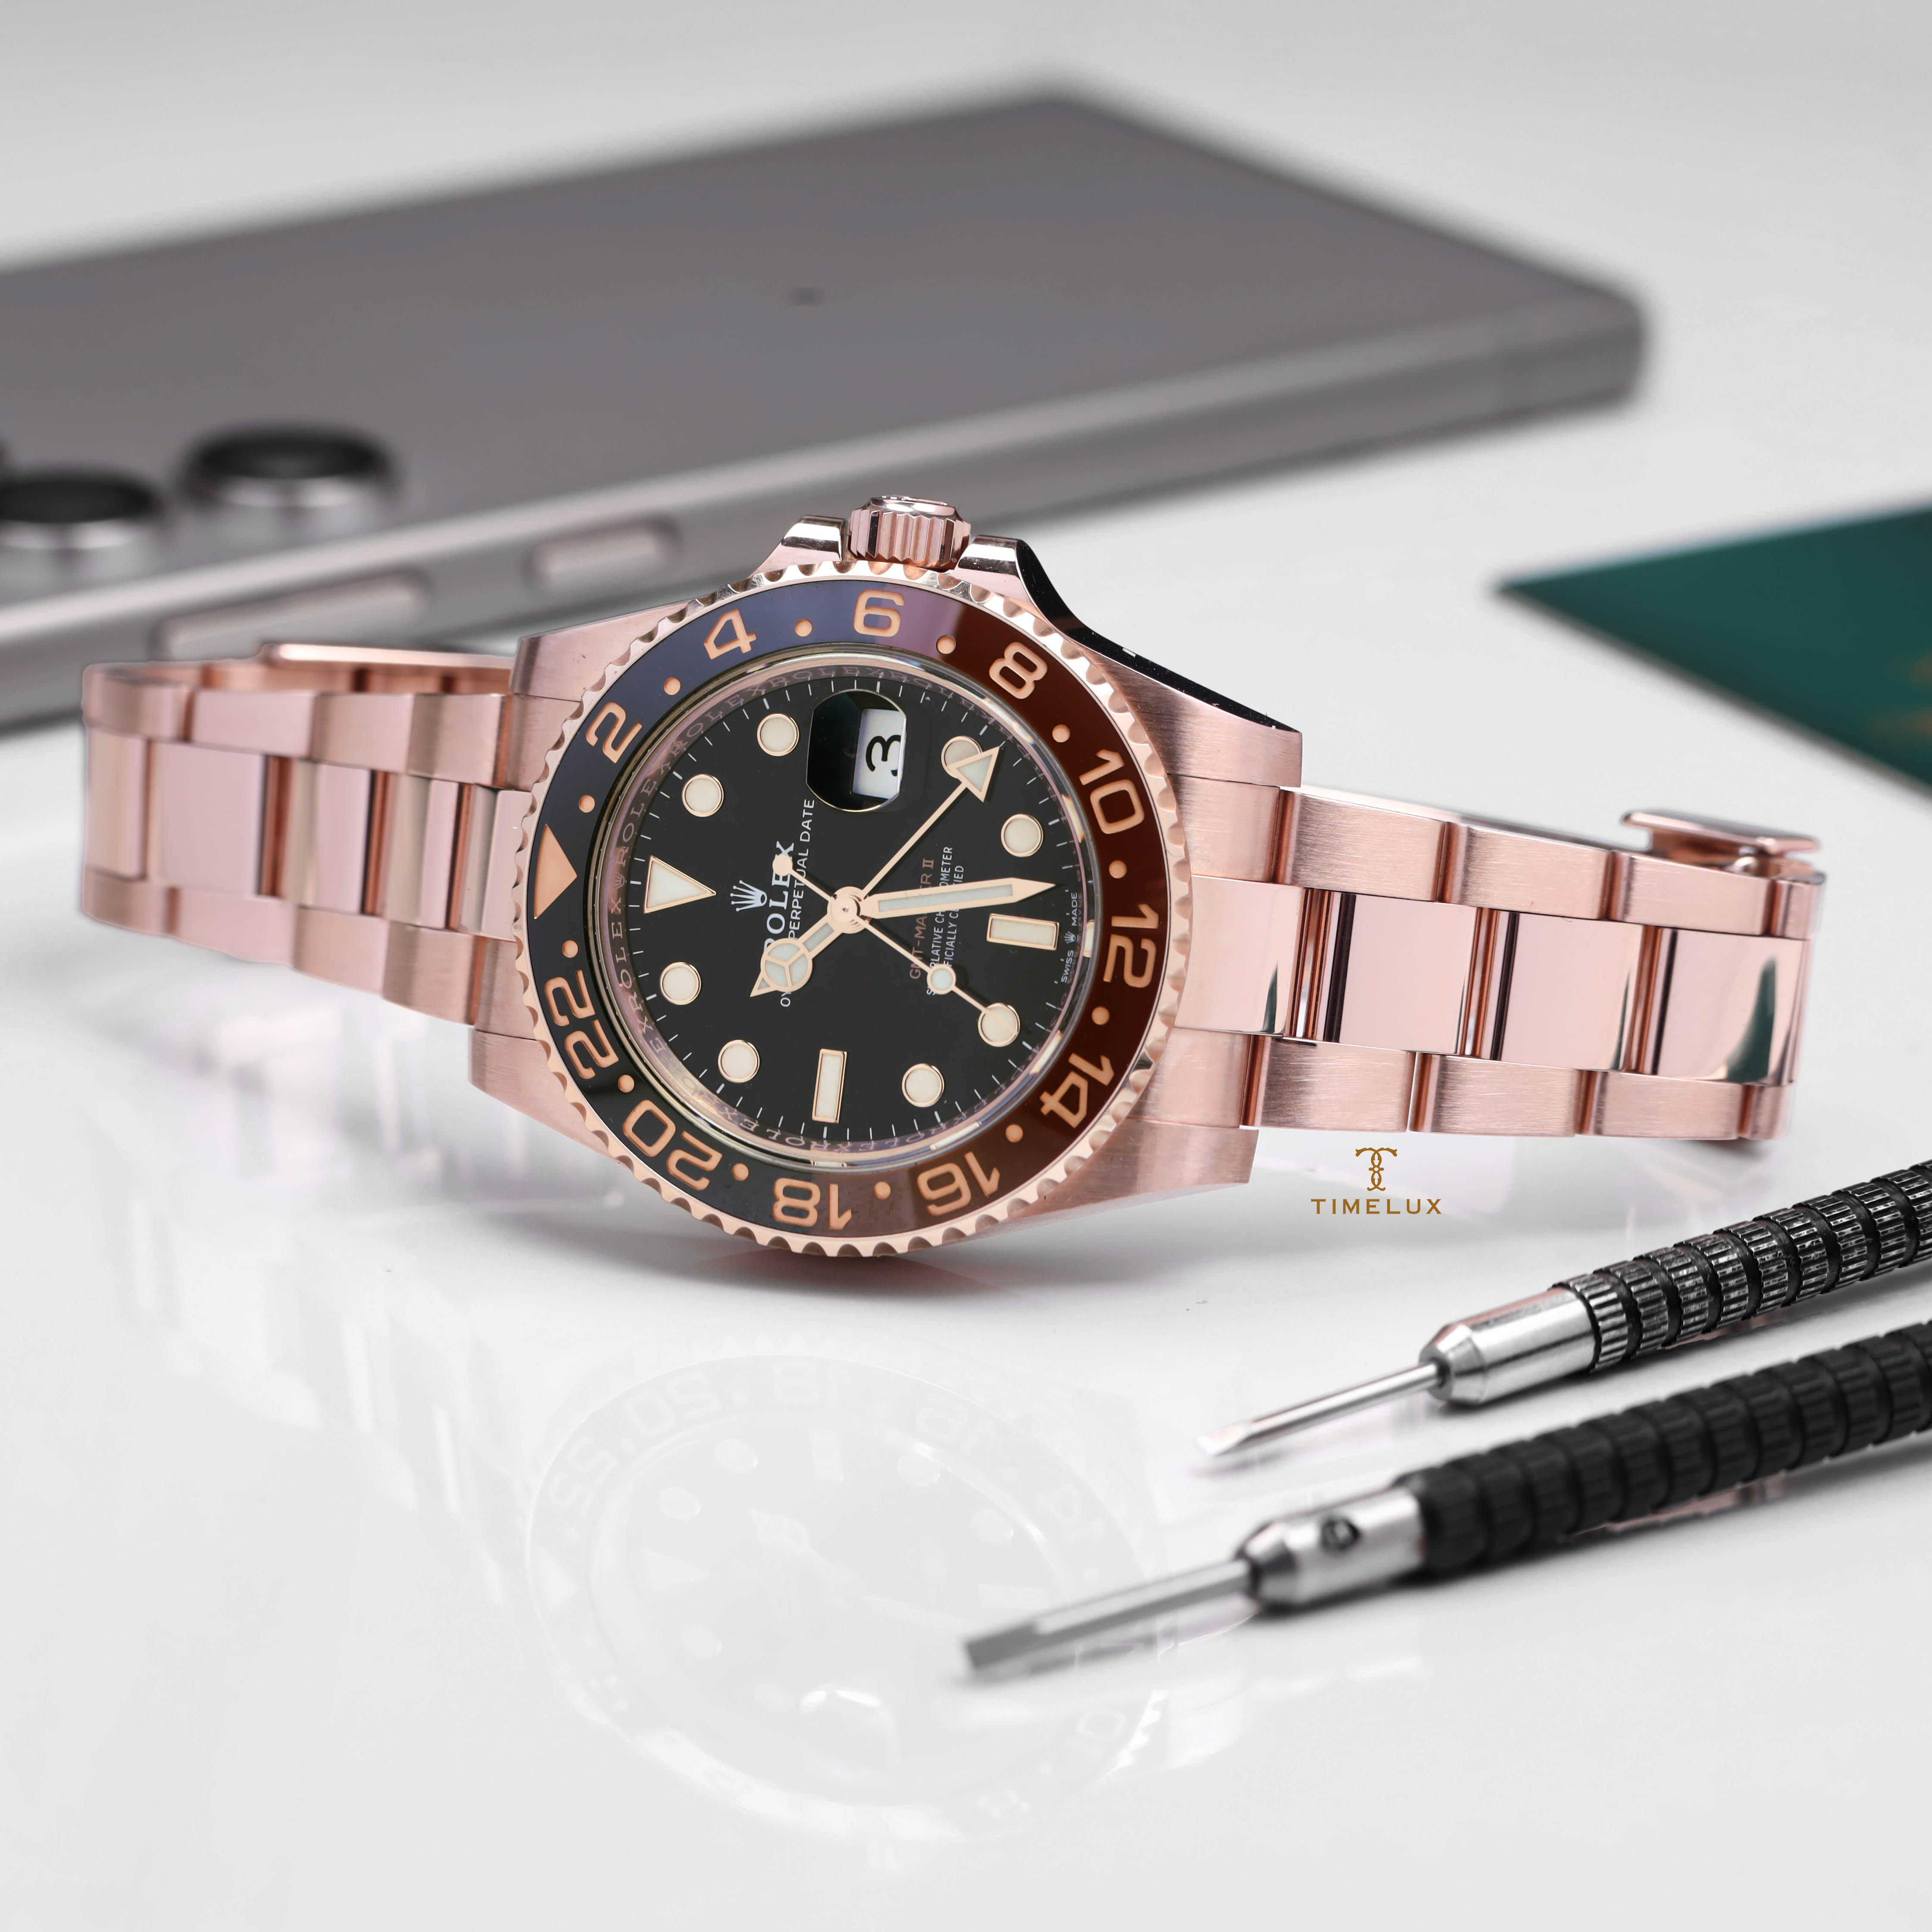 [USED] Đồng Hồ Nam Rolex GMT-MASTER II 40mm Rootbeer 126715 CHNR Candidate Thumbnail 2